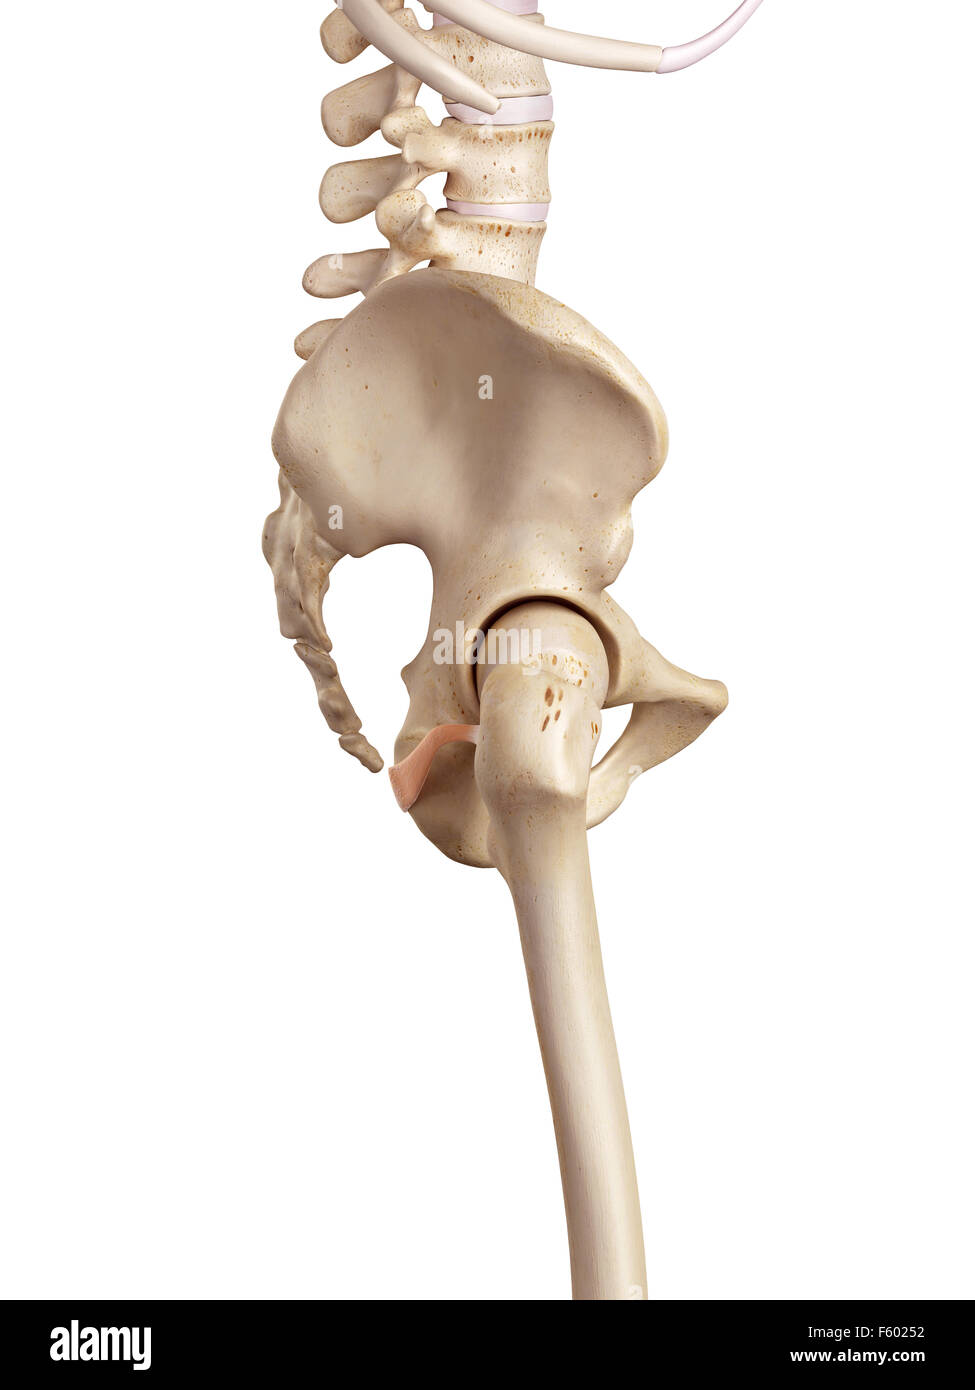 medical accurate illustration of the inferior gemellus Stock Photo